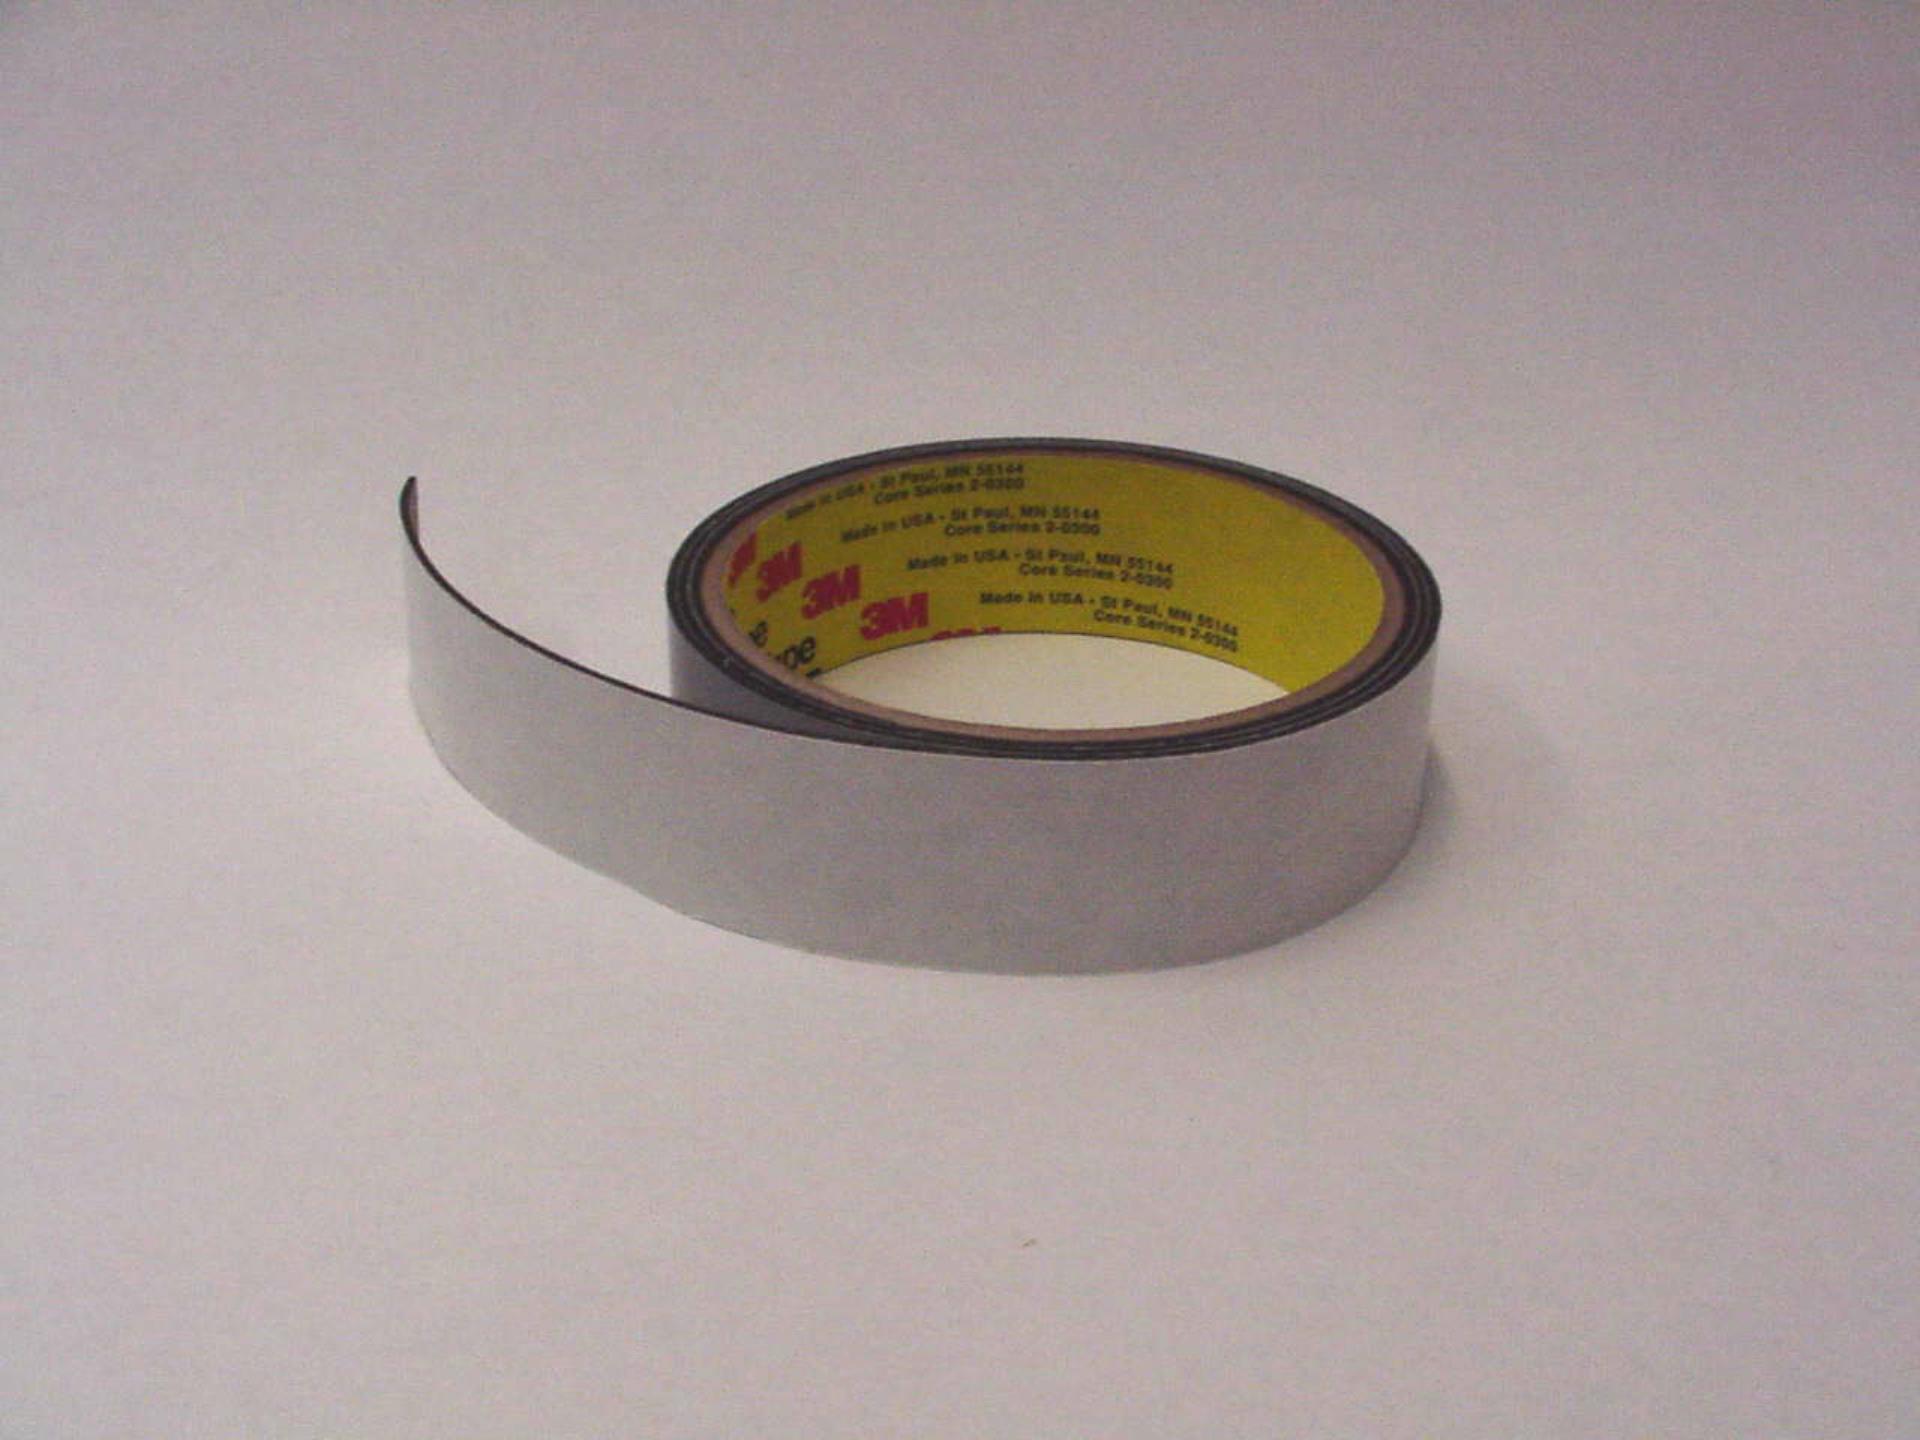 NEW 3M 4726 Vinyl Closed Cell Foam Tape 2" x 3'. Made in the USA 